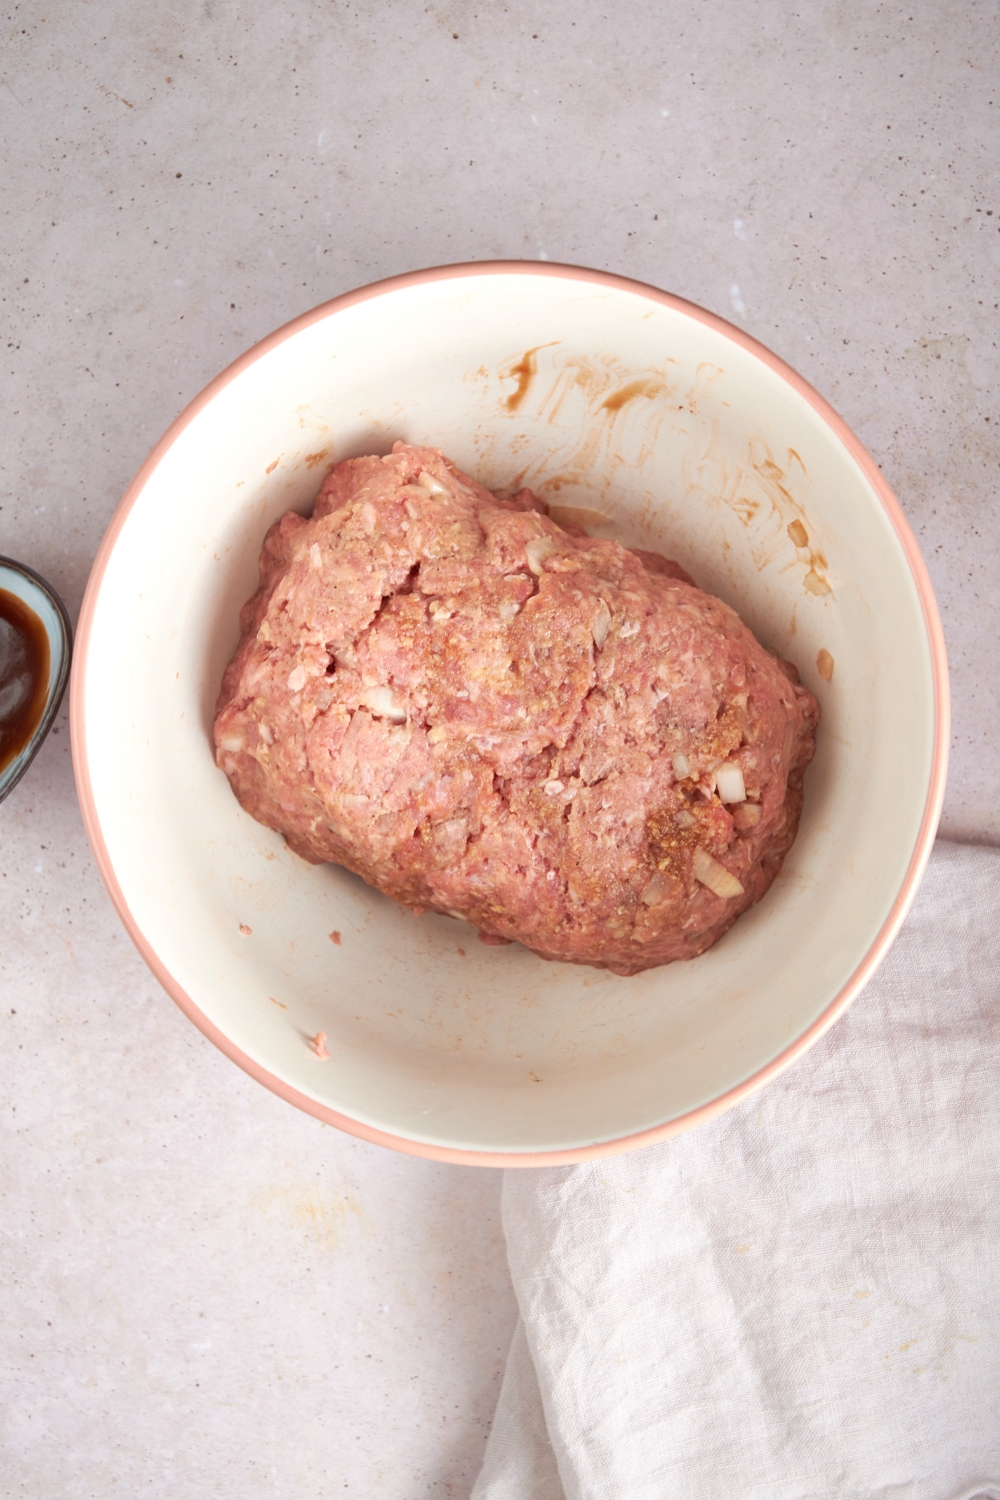 An uncooked meatloaf in a white mixing bowl.